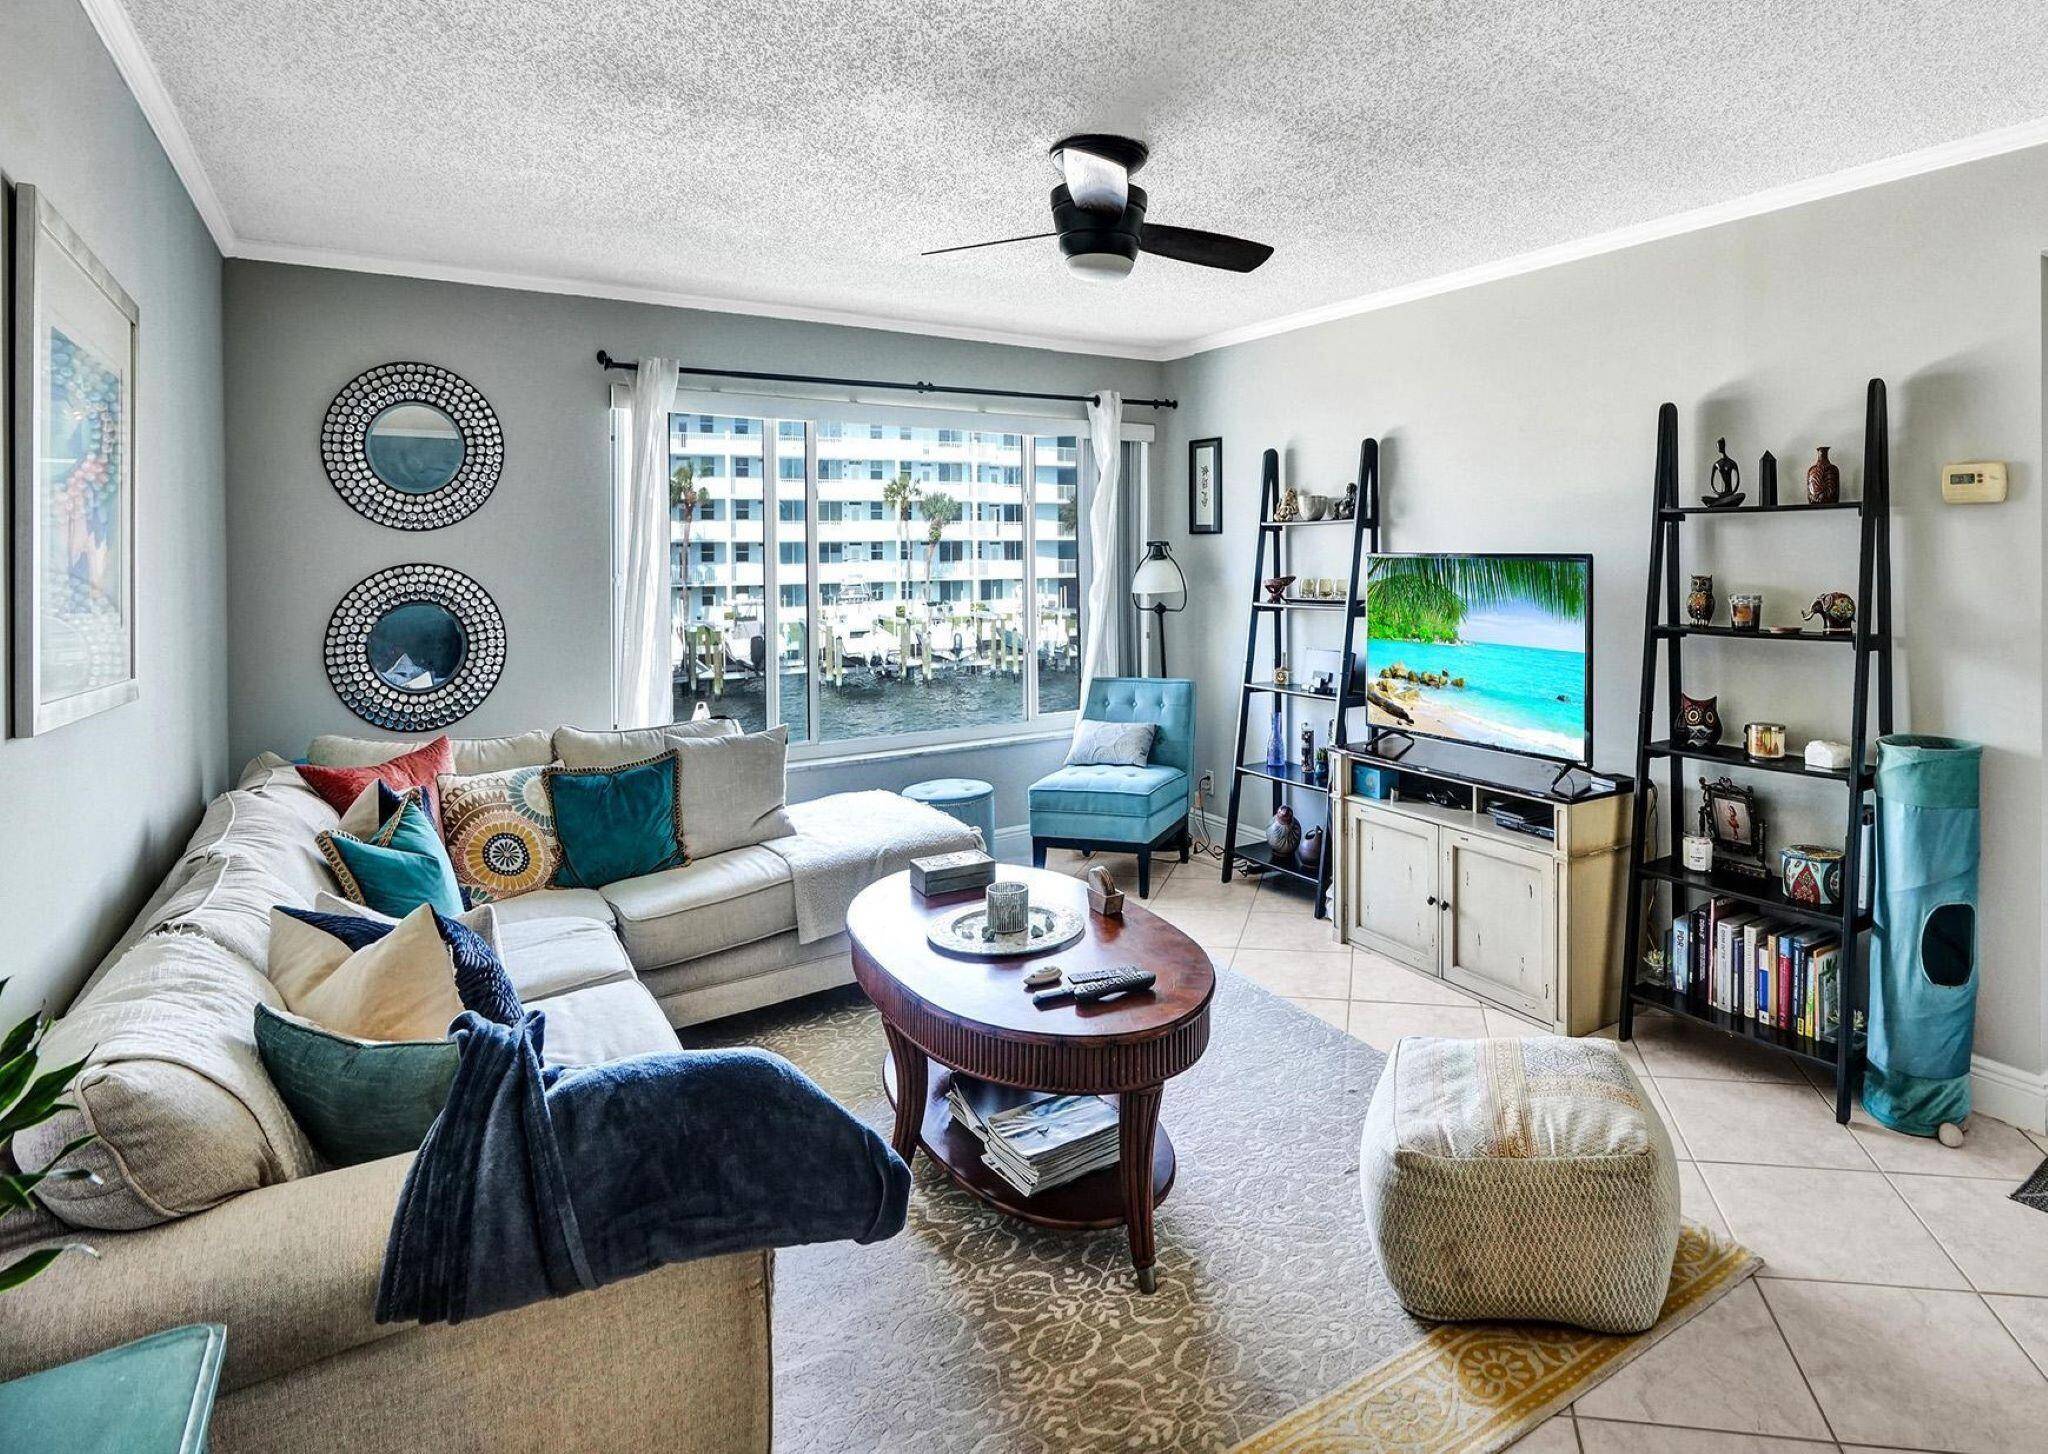 Relax and watch the boats go by from your sought after 2 bedroom end unit.